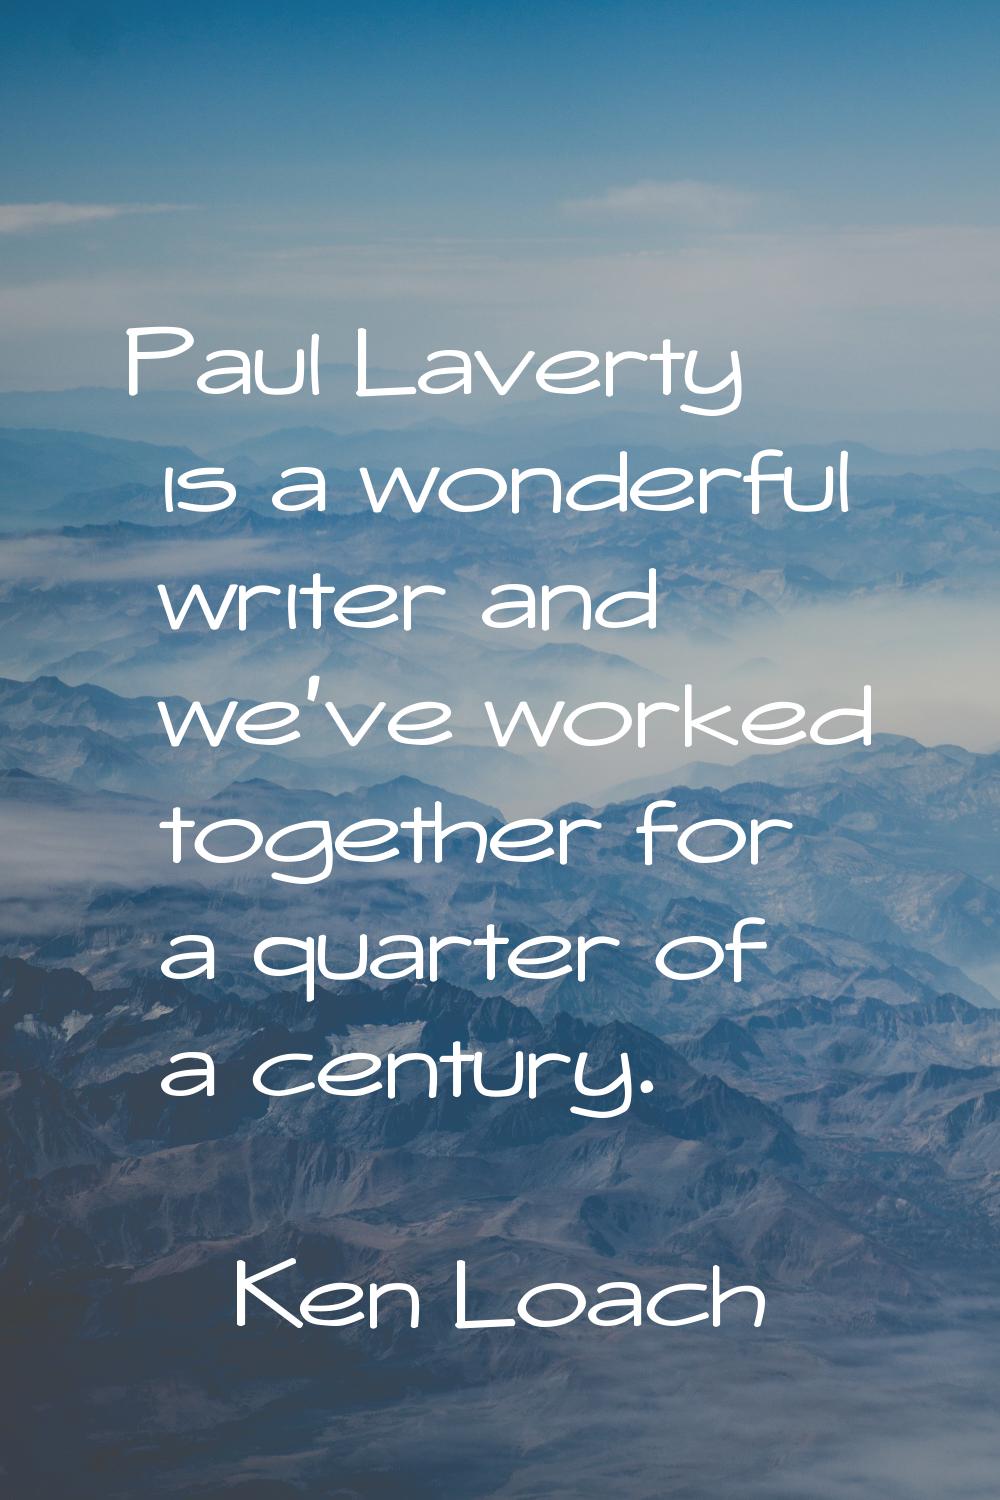 Paul Laverty is a wonderful writer and we've worked together for a quarter of a century.